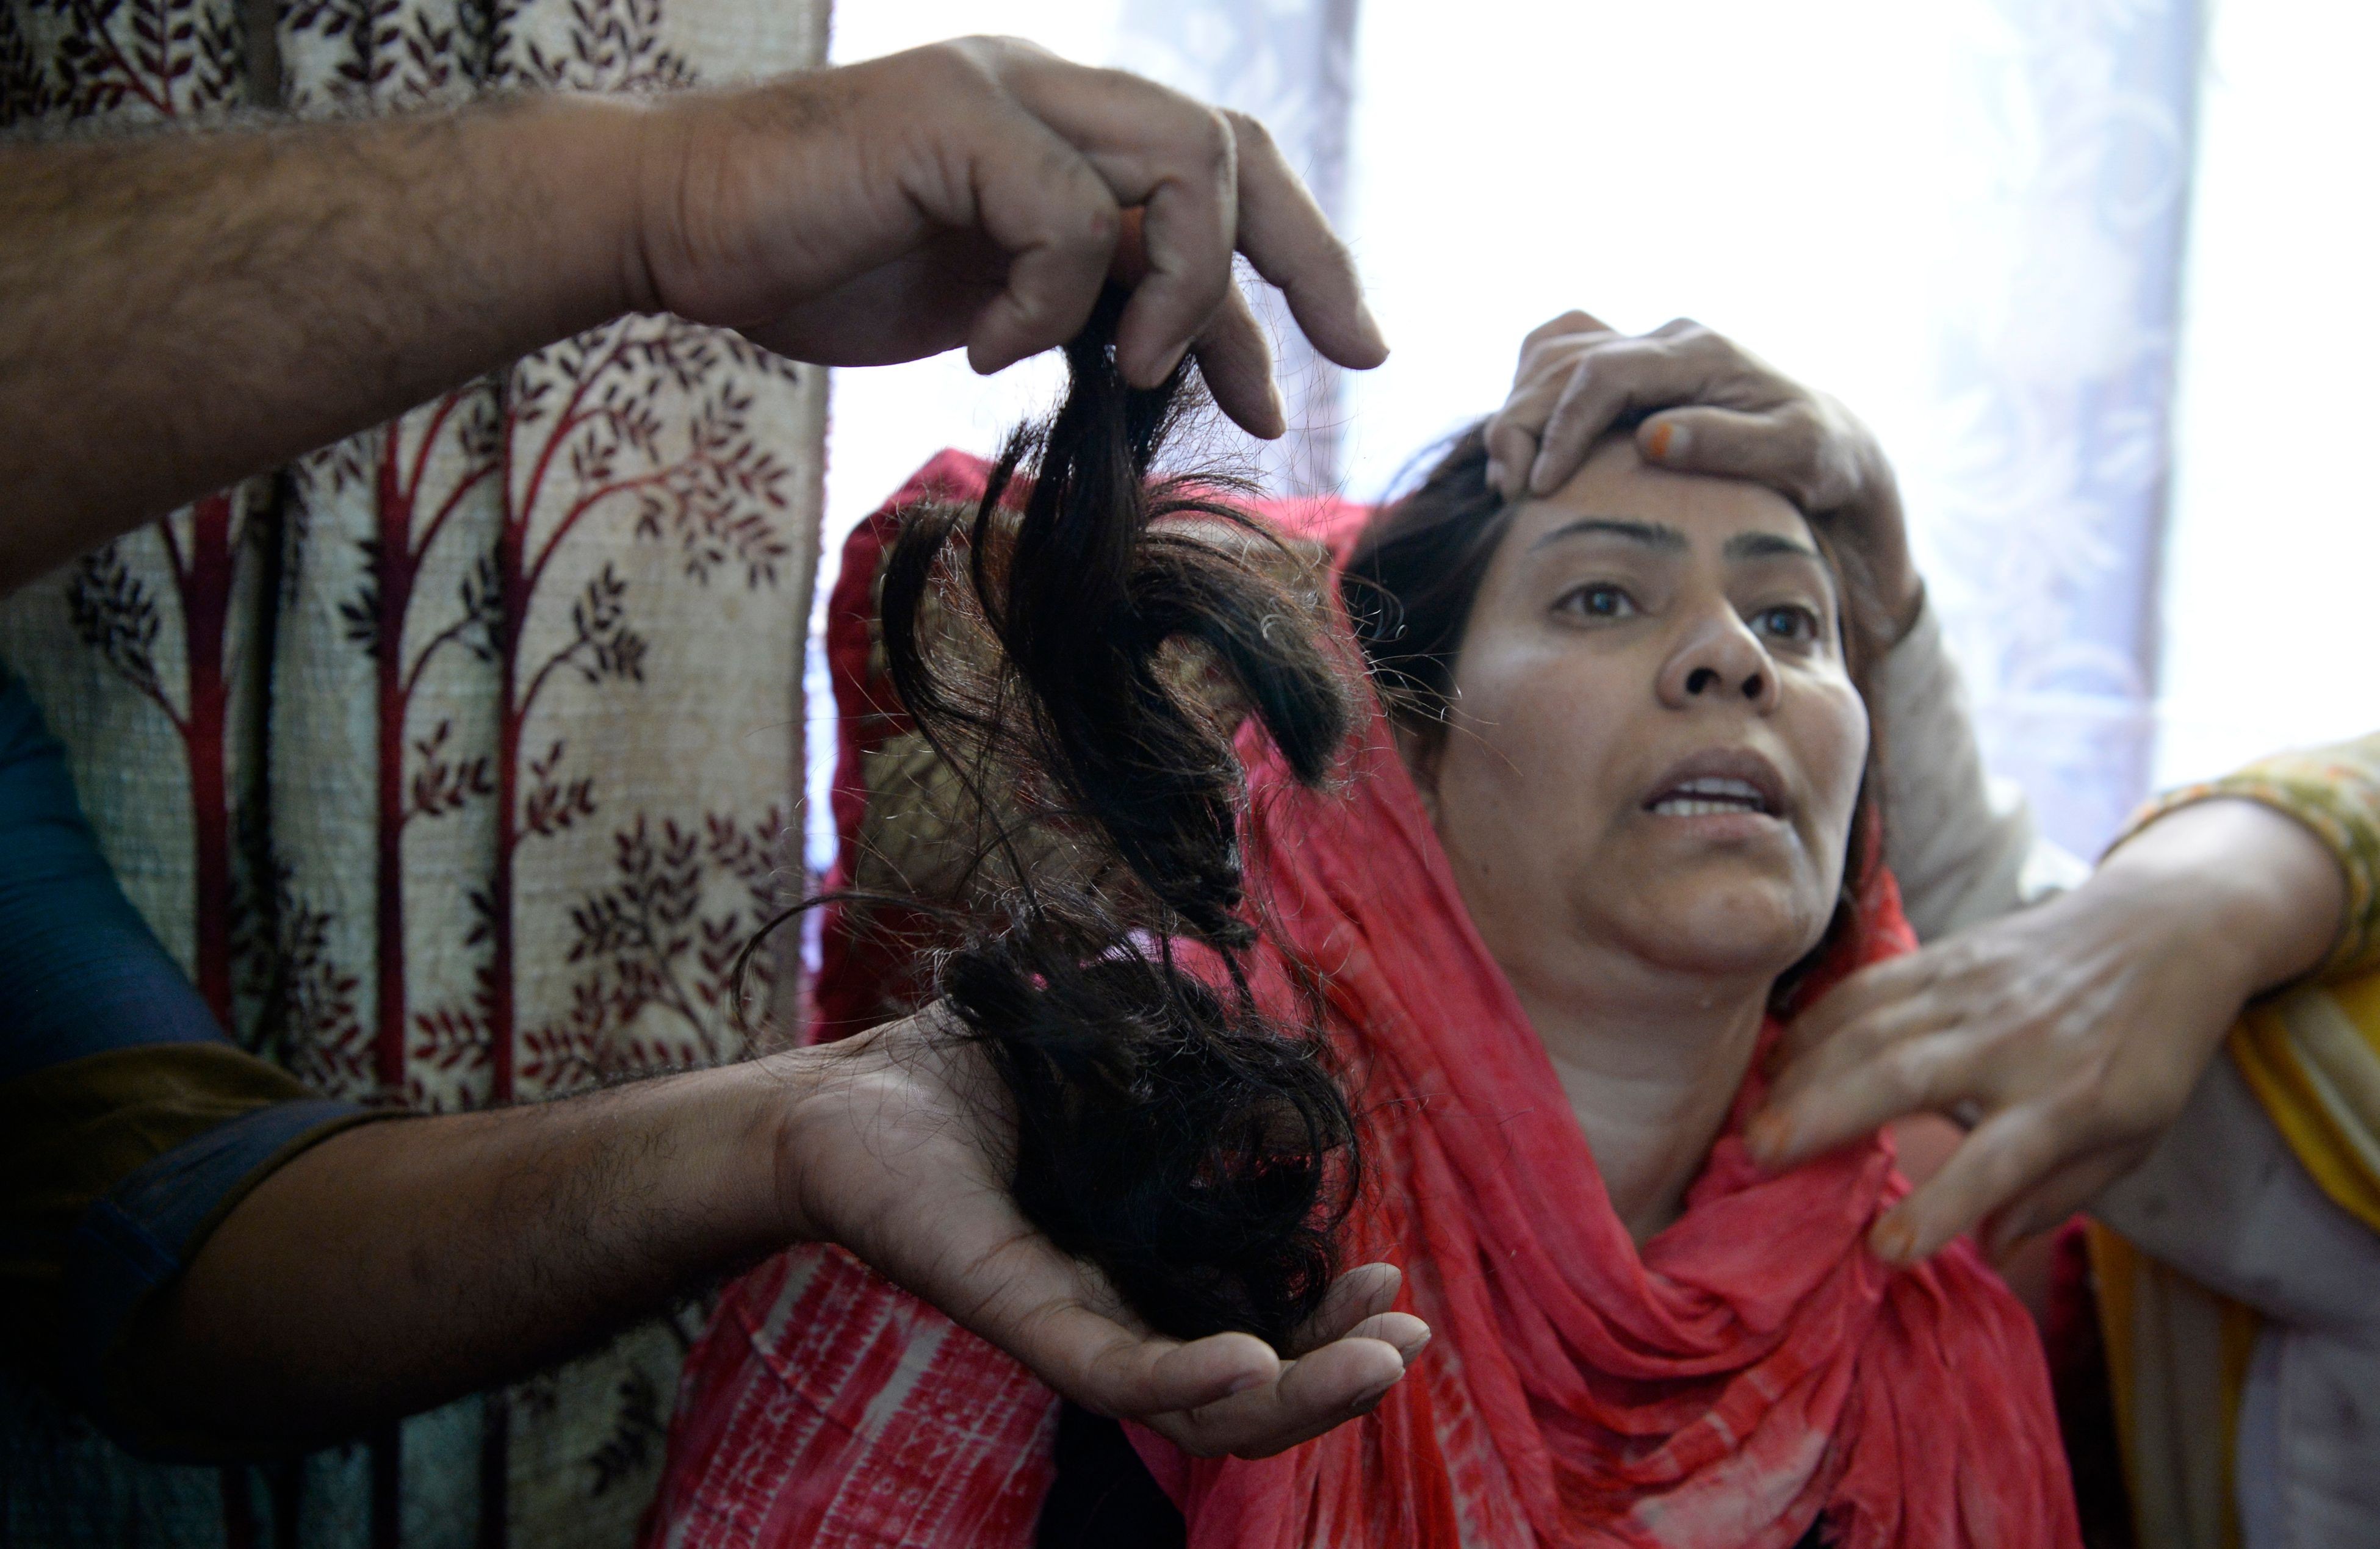 Mystery 'hair-chopping' attacks fuel deadly backlash and hysteria in Kashmir  | South China Morning Post